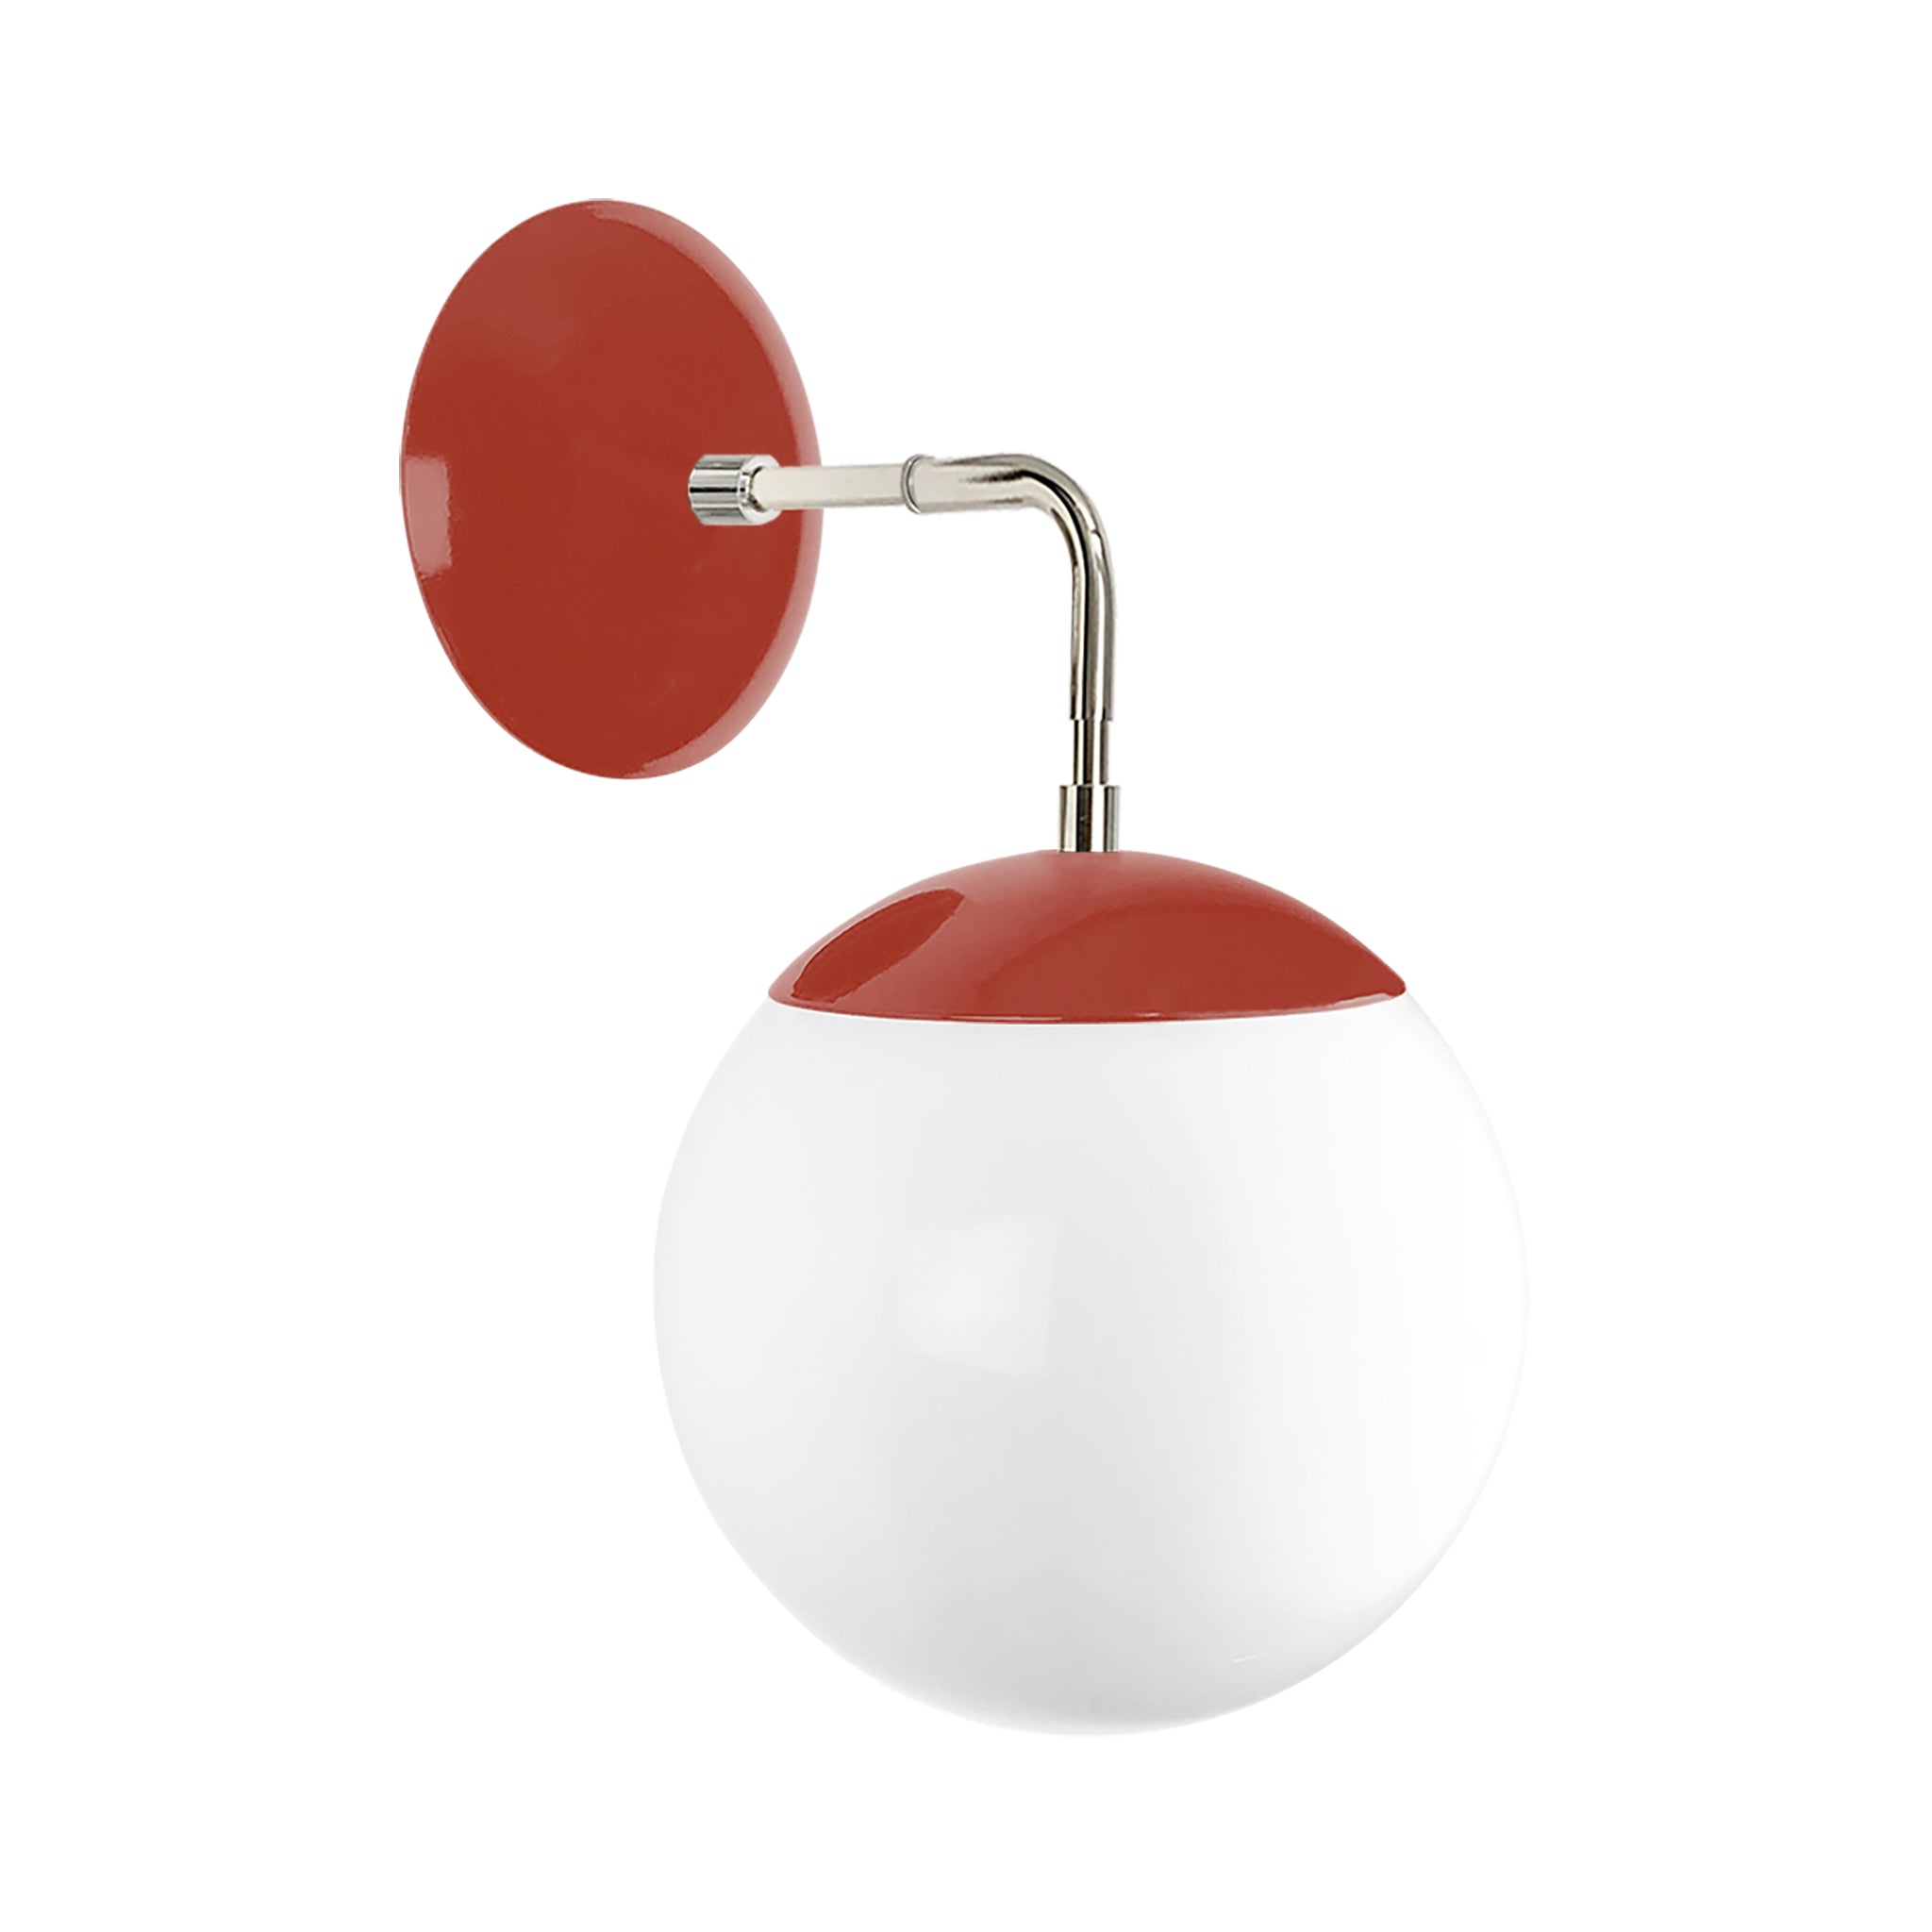 Nickel and riding hood red color Cap sconce 8" Dutton Brown lighting